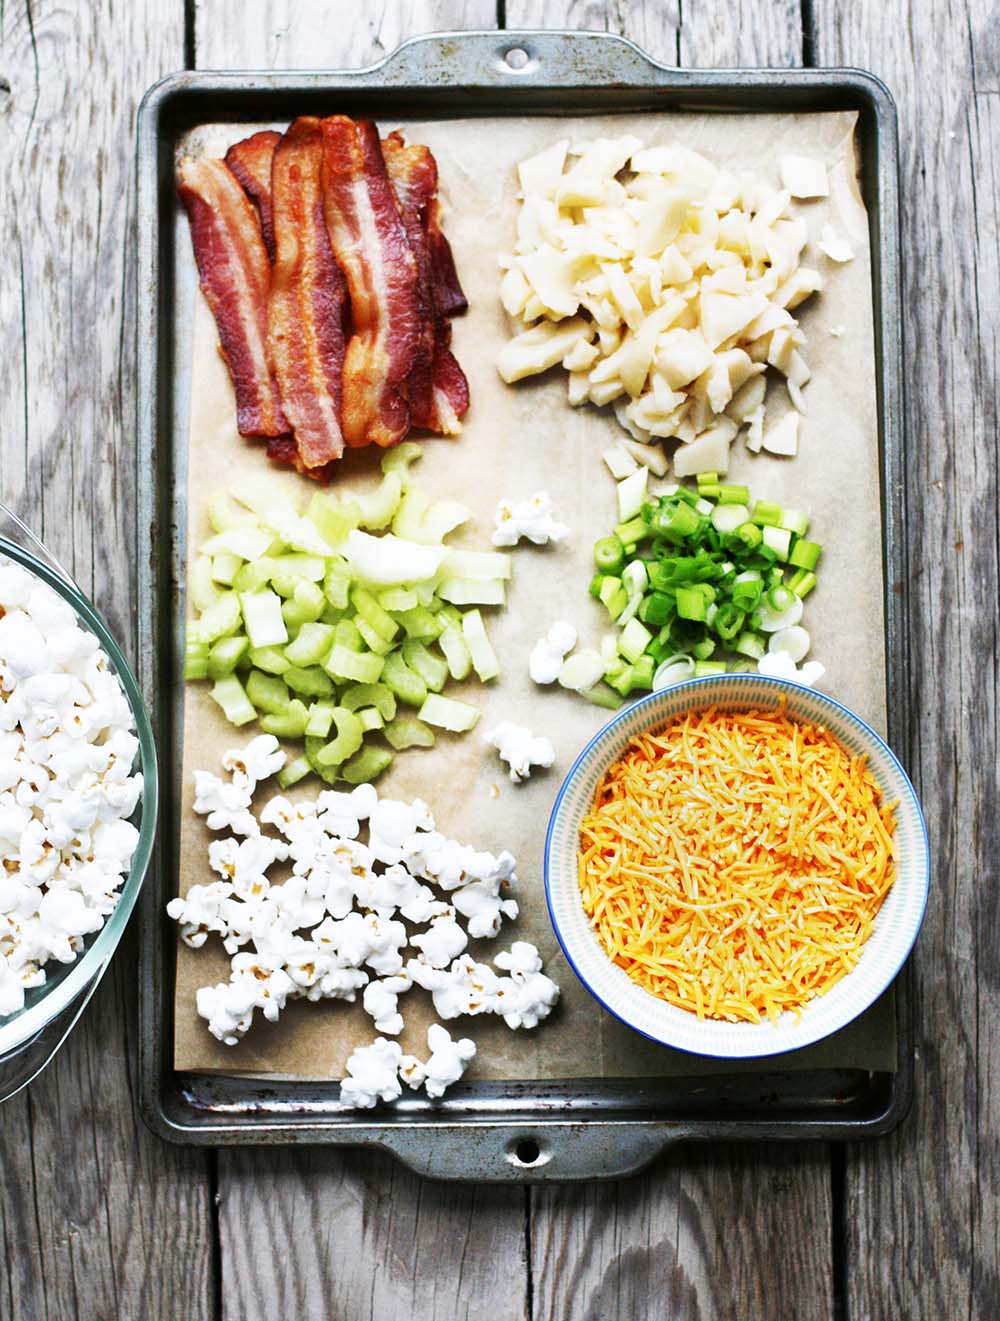 Ingredients needed to make popcorn salad: Click through for detailed recipe!